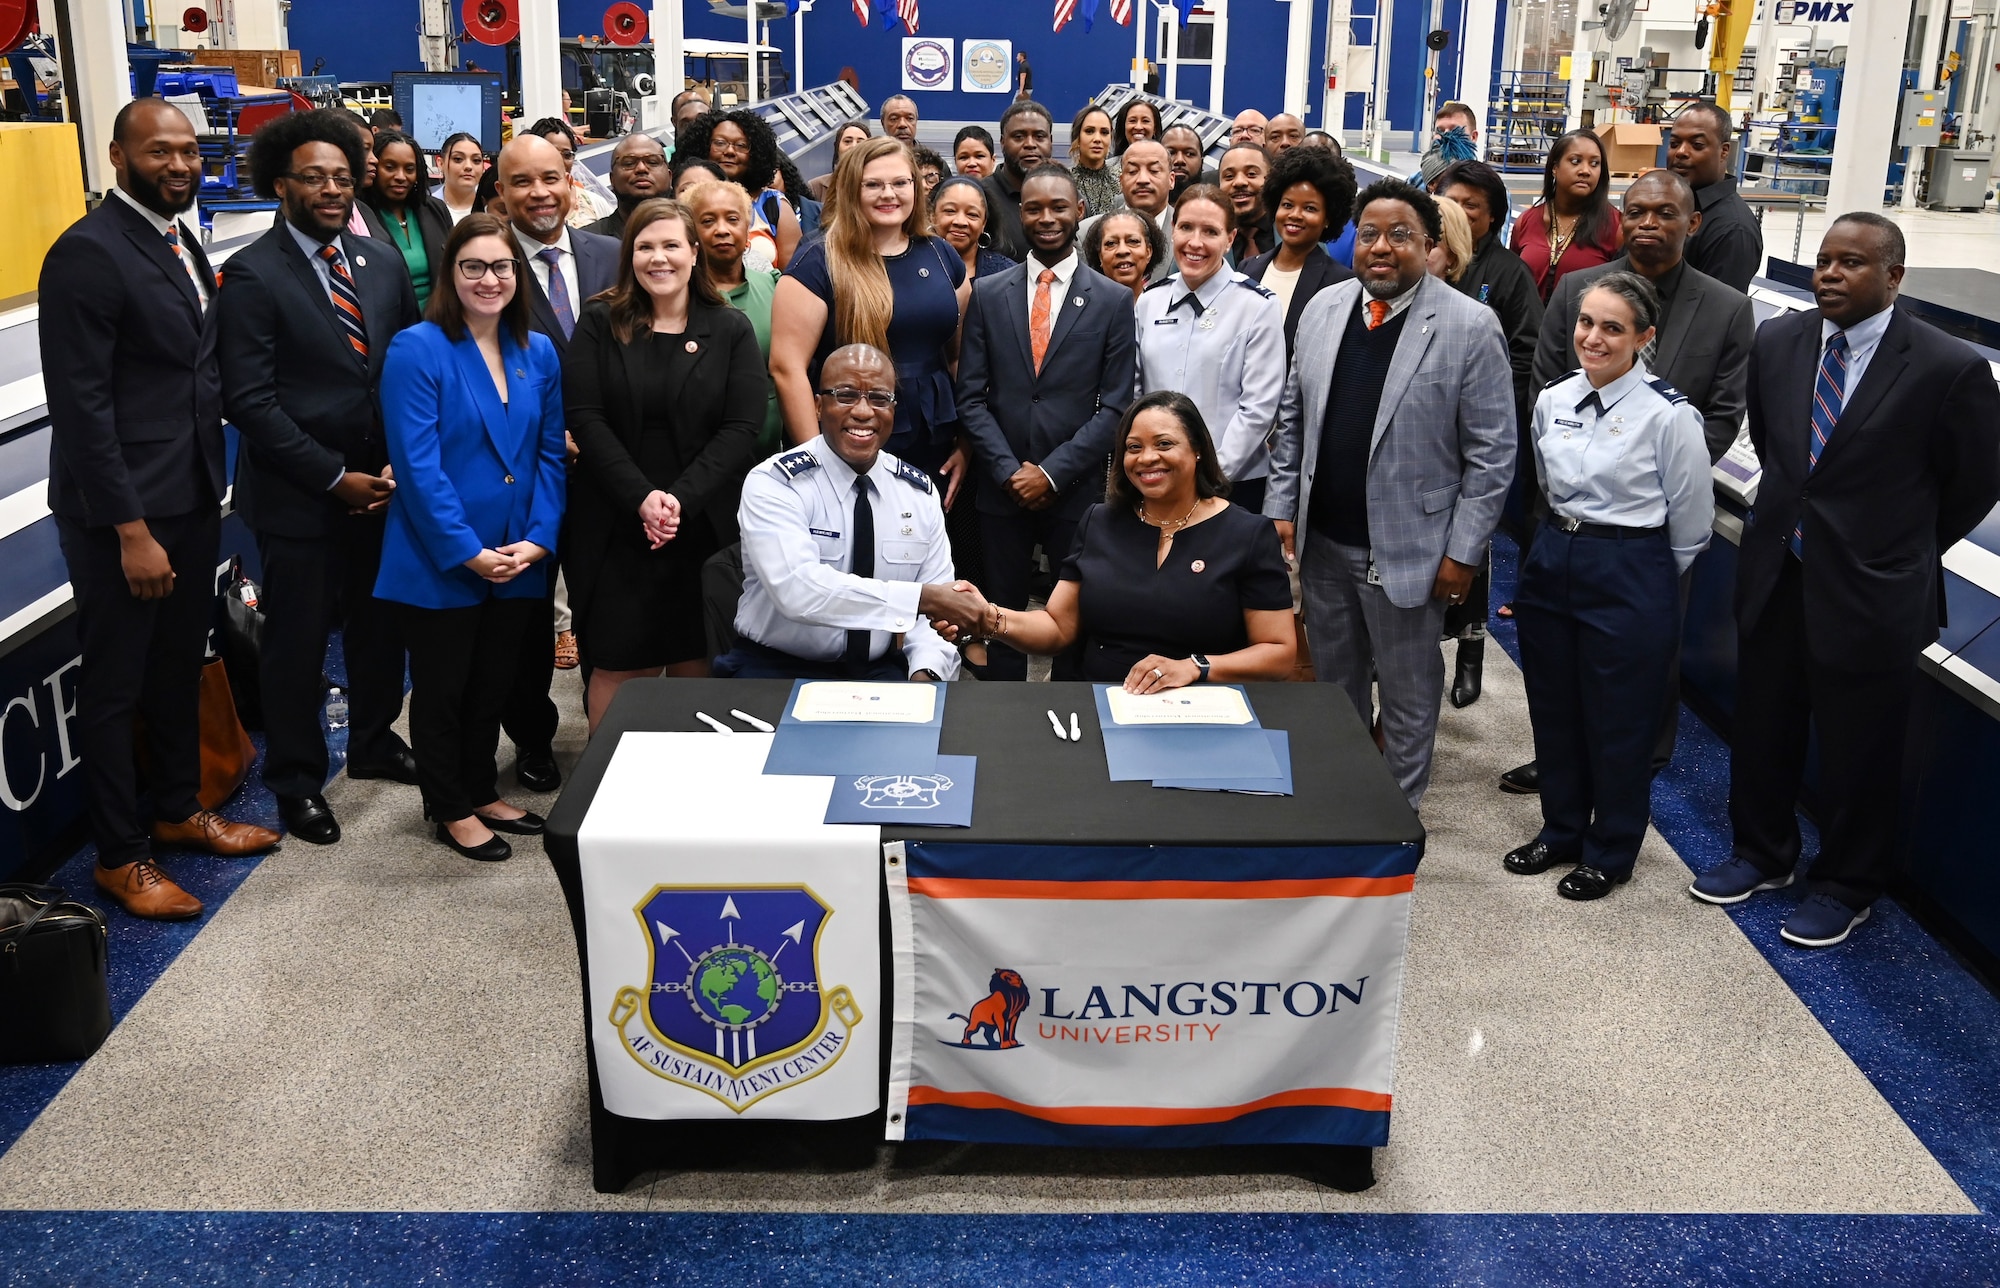 Surrounded by Langston alumni employed at Tinker Air Force Base, Okla., and Air Force Sustainment Center and LU leadership, U.S. Air Force Lt. Gen. Stacey T. Hawkins, AFSC commander, and Dr. Ruth Ray Jackson, Langston University interim president shake hands after the signing of official documents establishing an educational partnership agreement between the two entities.